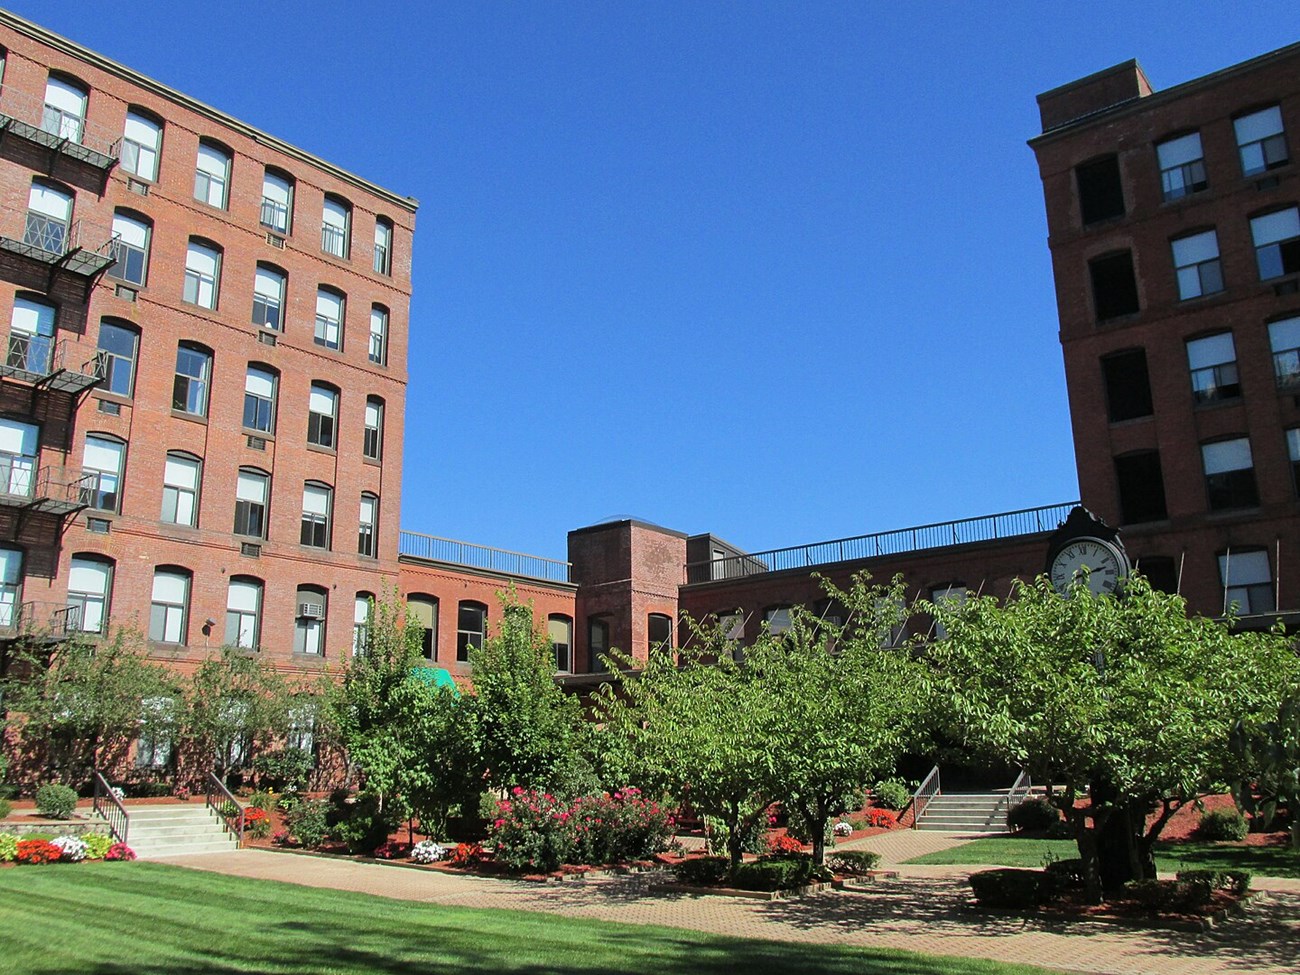 Six story red brick building on the left and right connected by a one story brick building, almost entirely covered by green plants and flowers in a courtyard.